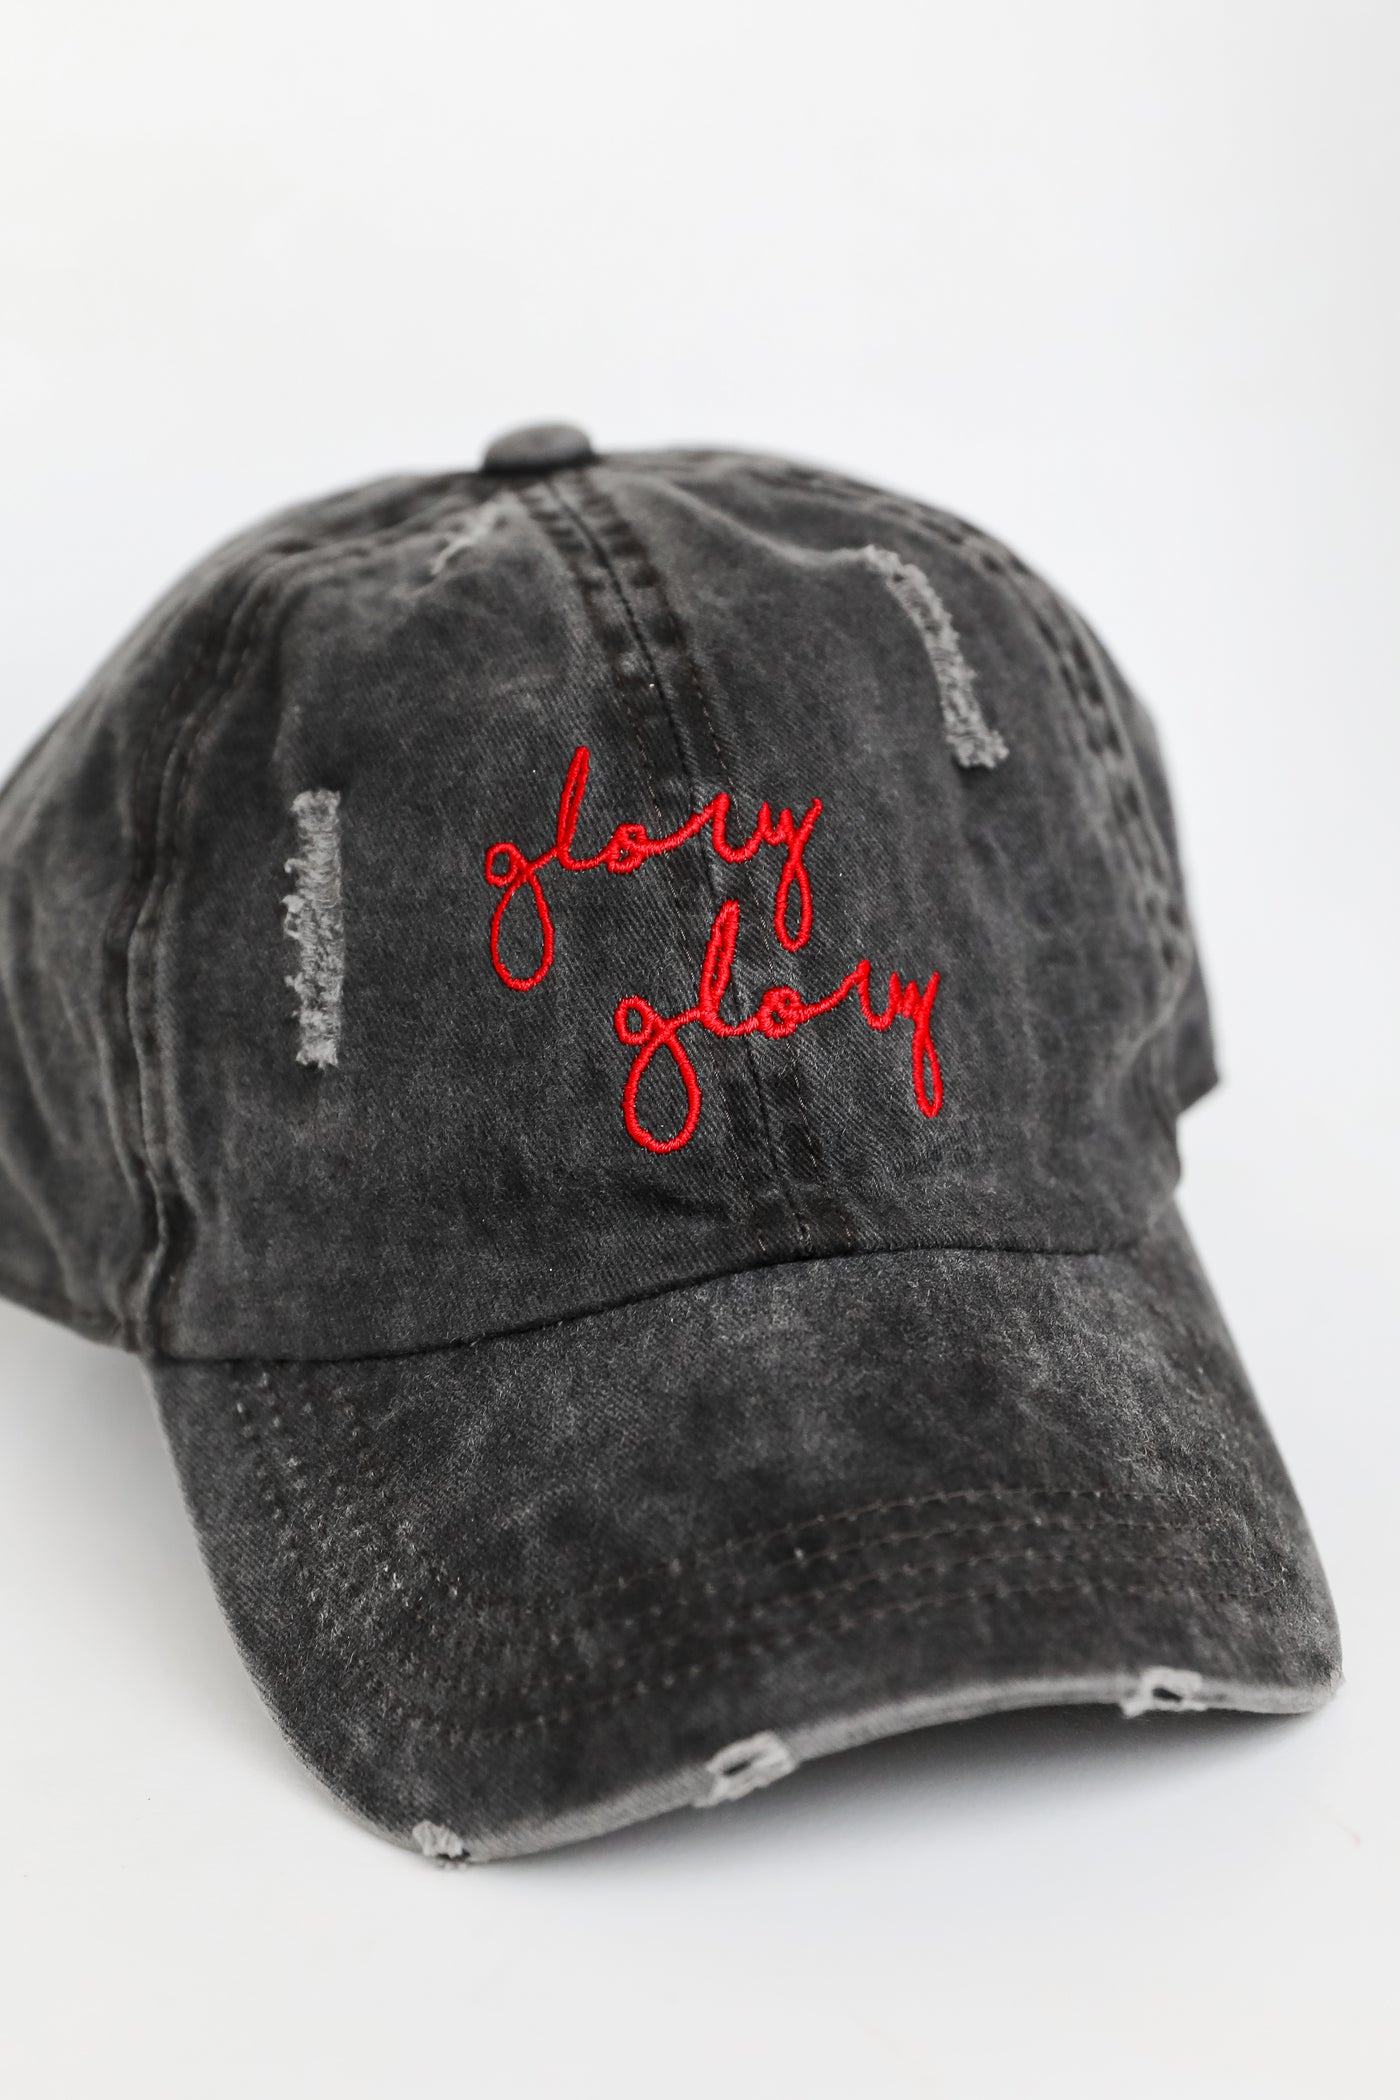 Glory Glory Script Embroidered Hat flat lay